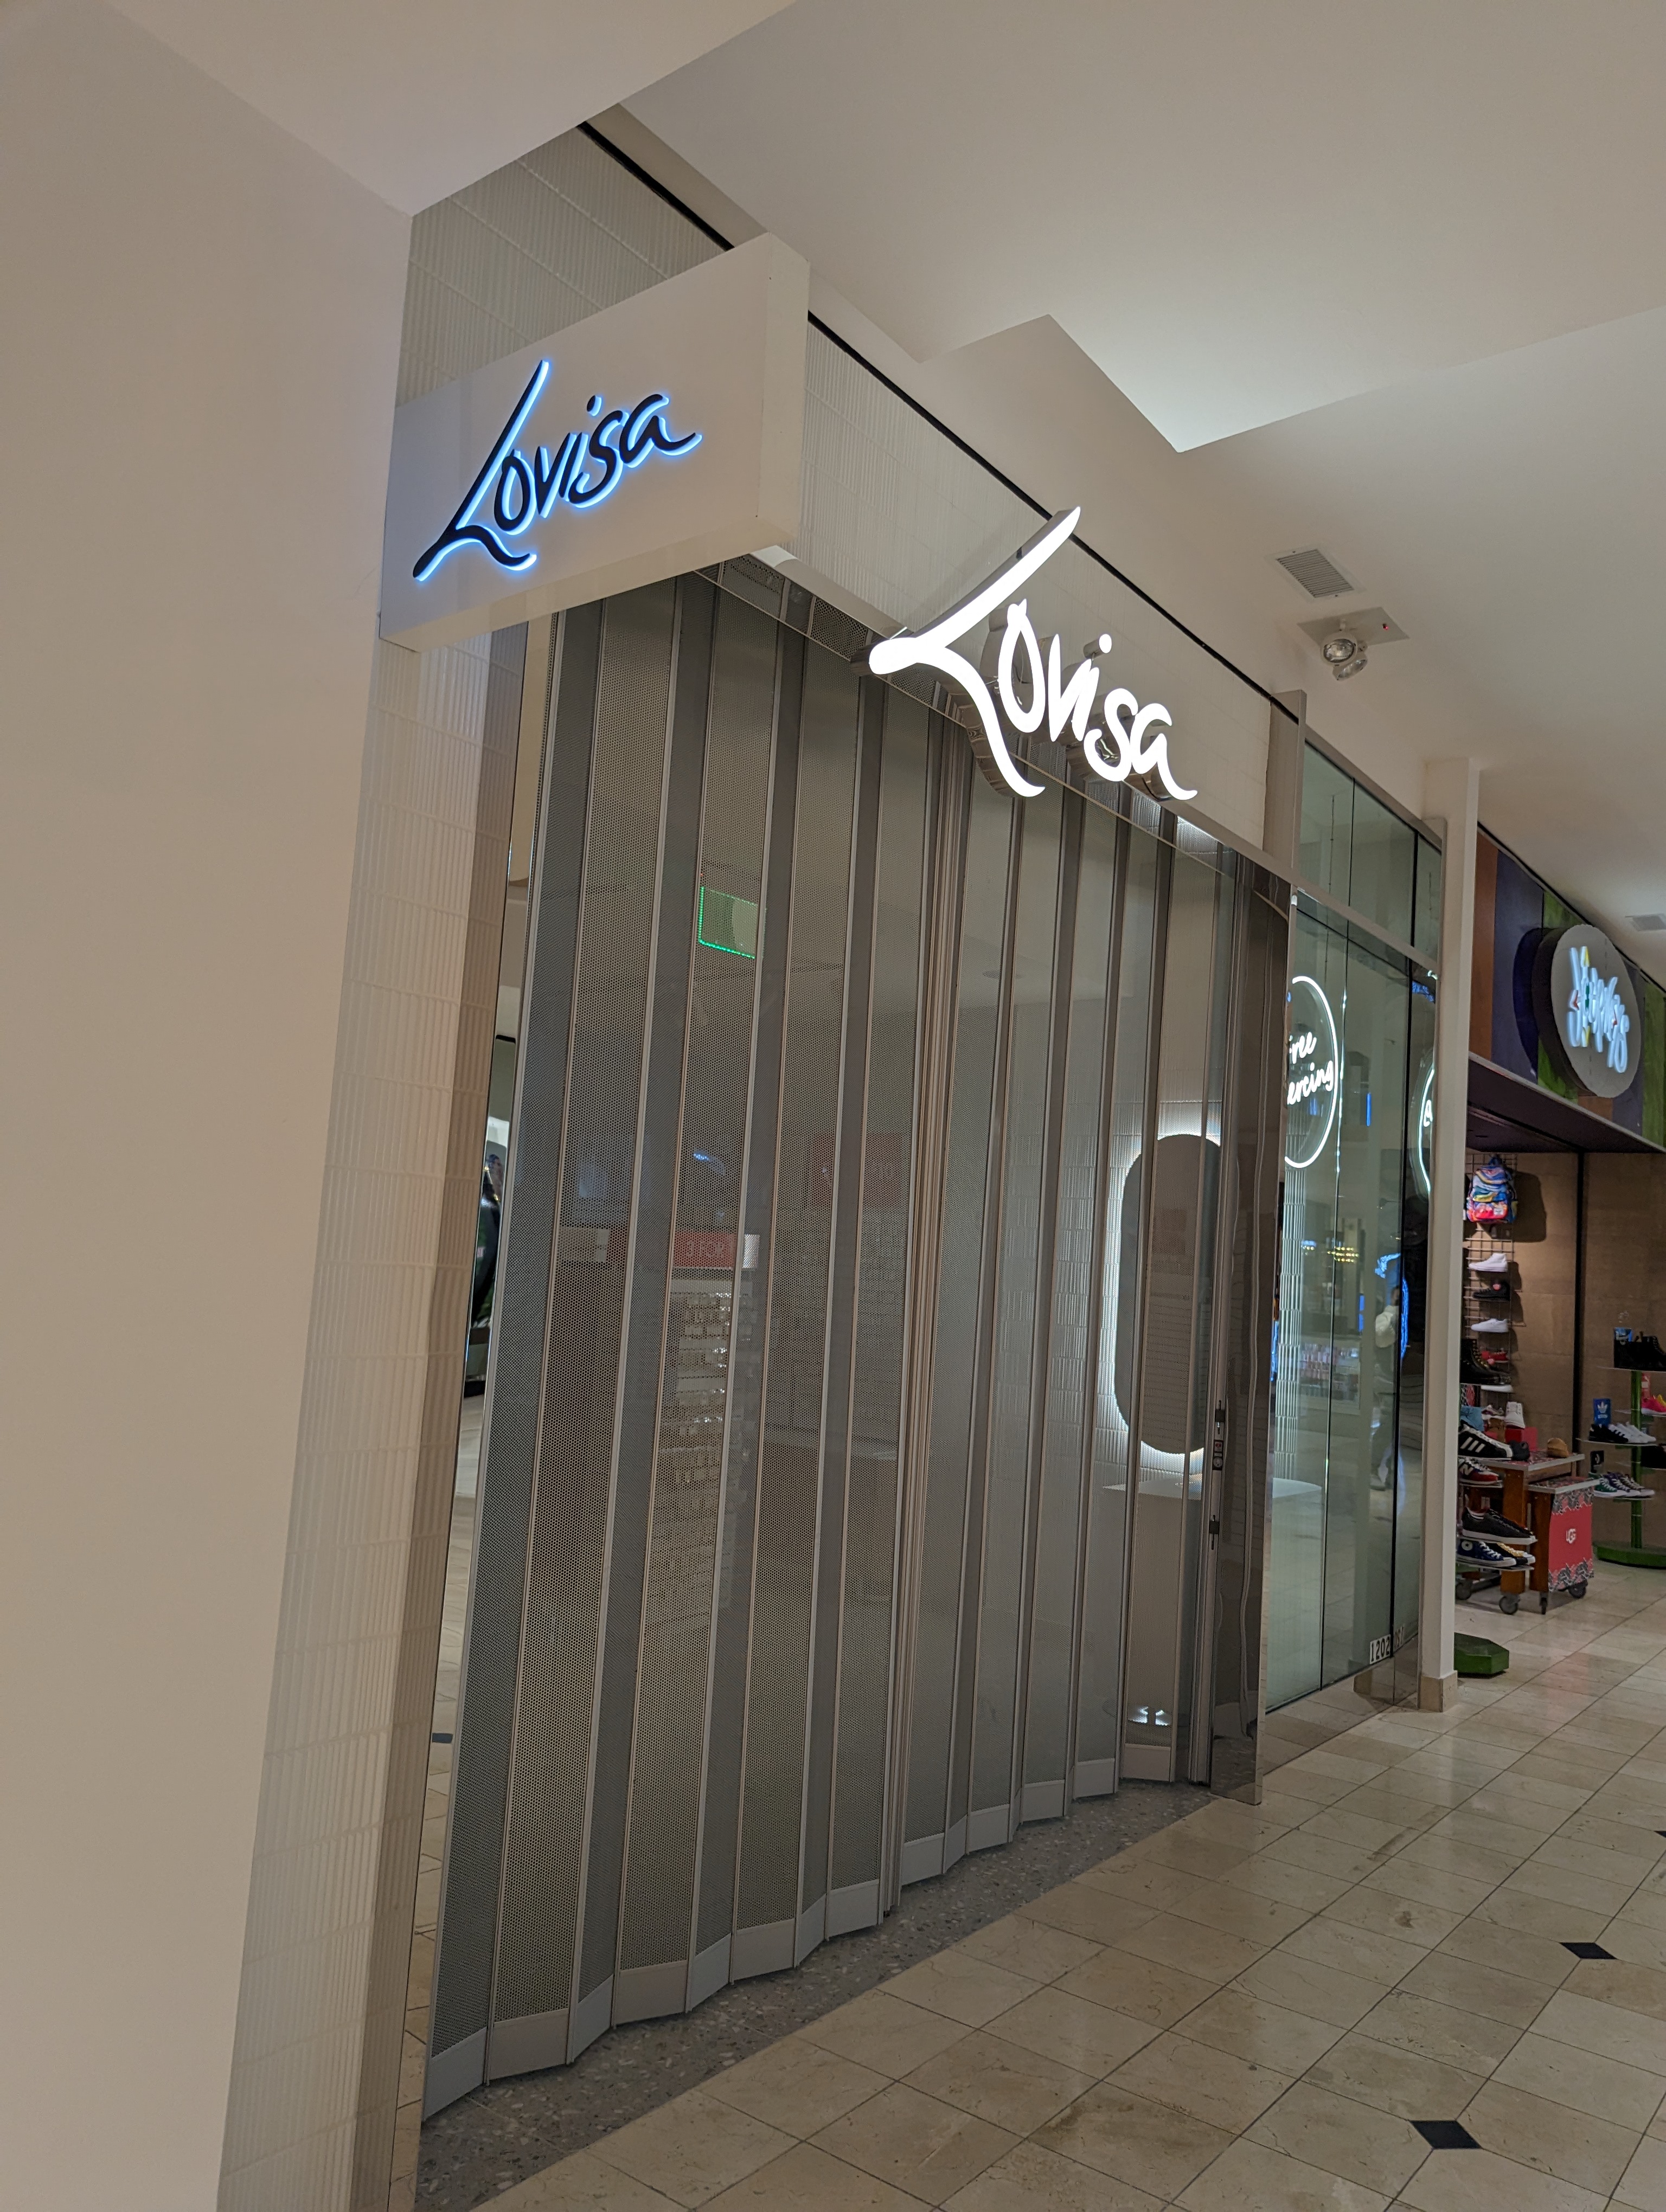 Rockville Nights: Lovisa to open boutique at Montgomery Mall in Bethesda